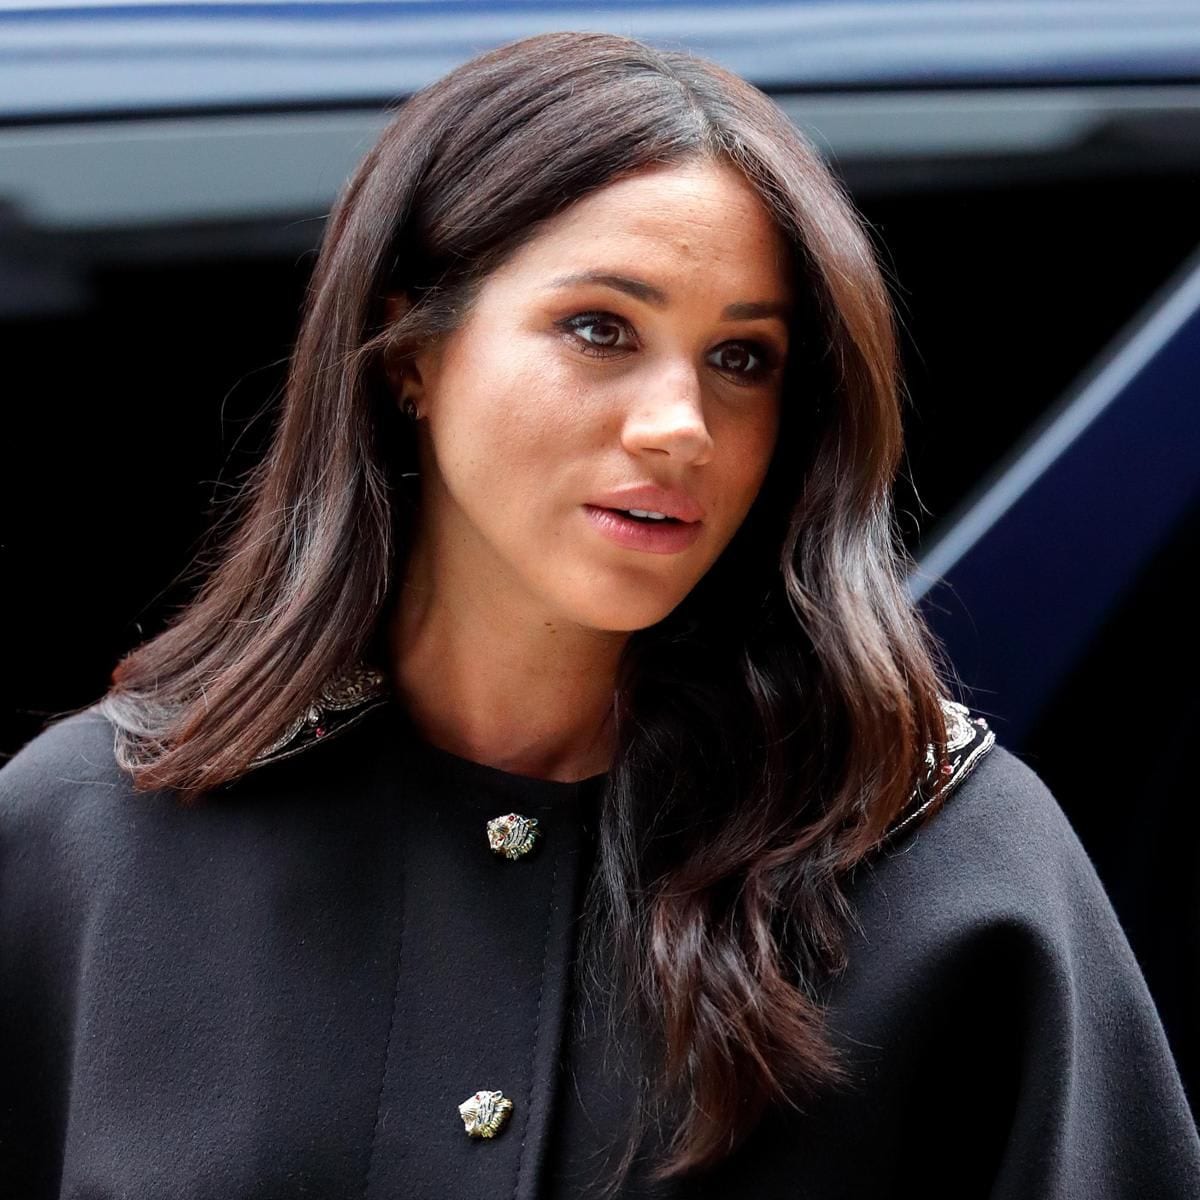 Meghan Markle pens message remembering her late friend